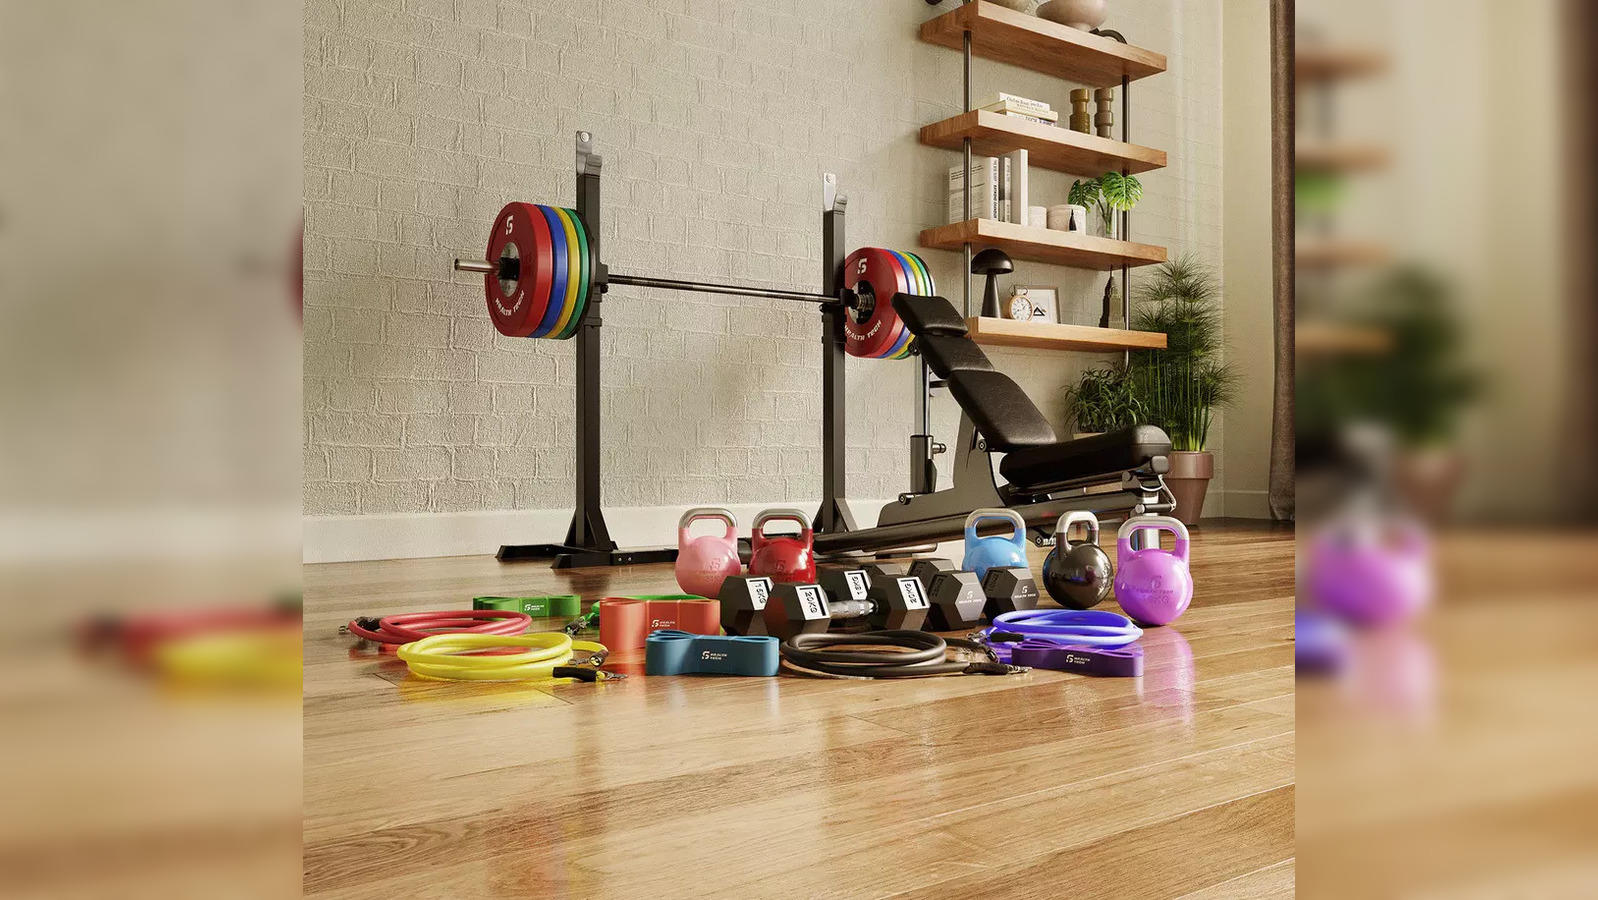  Low Impact at Home Workout Equipment - Multifunctional